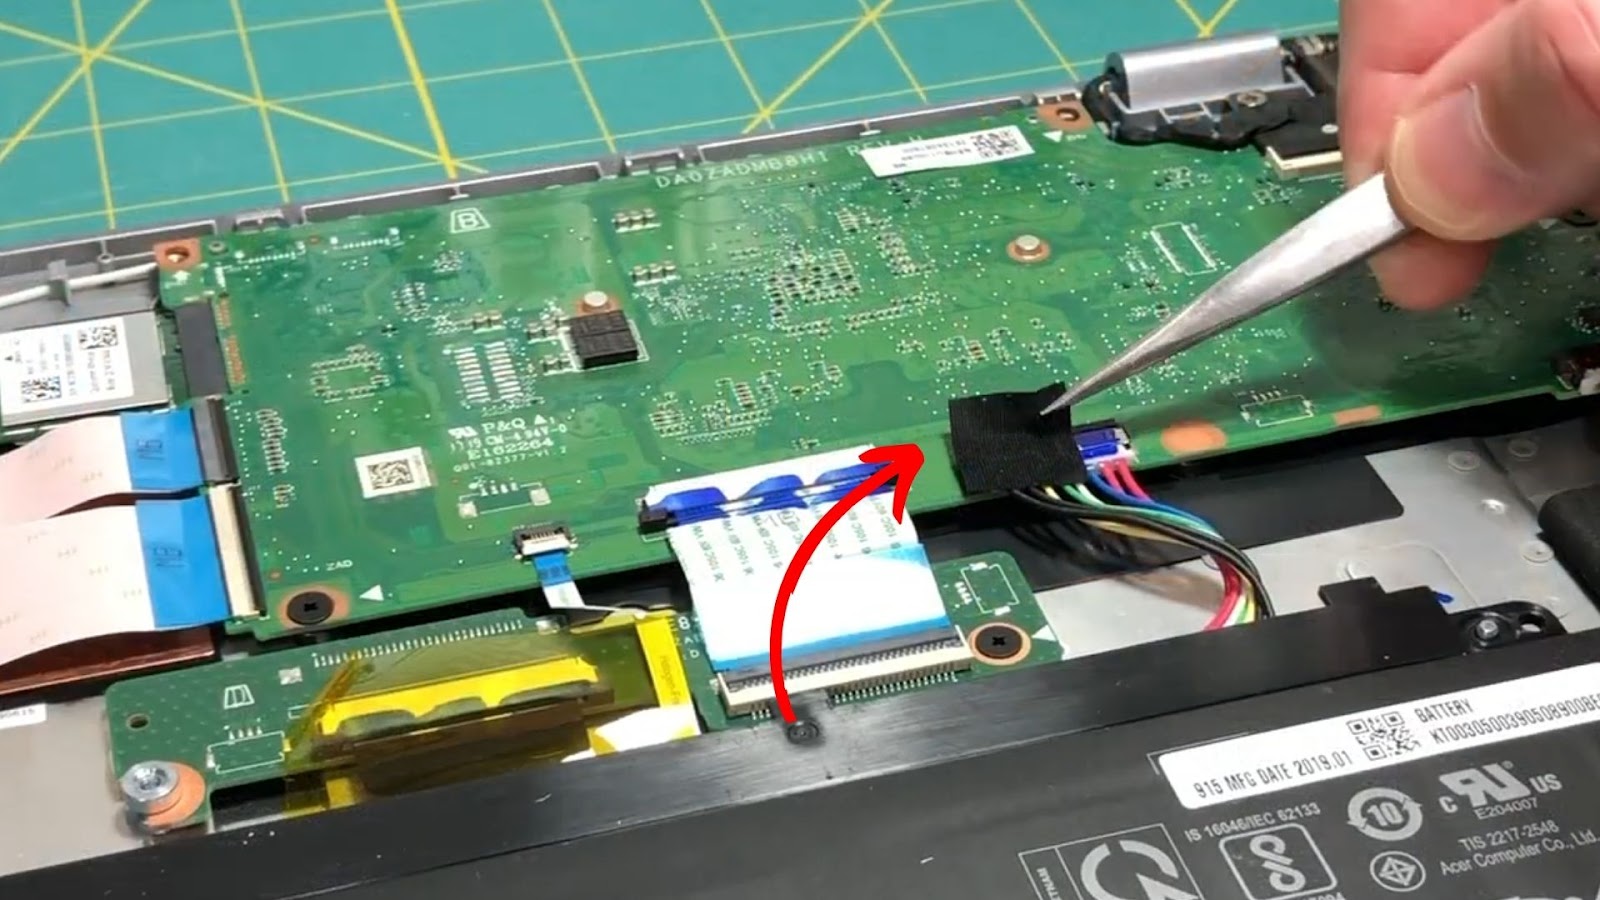 Insulation Tape Connector on a Chromebook